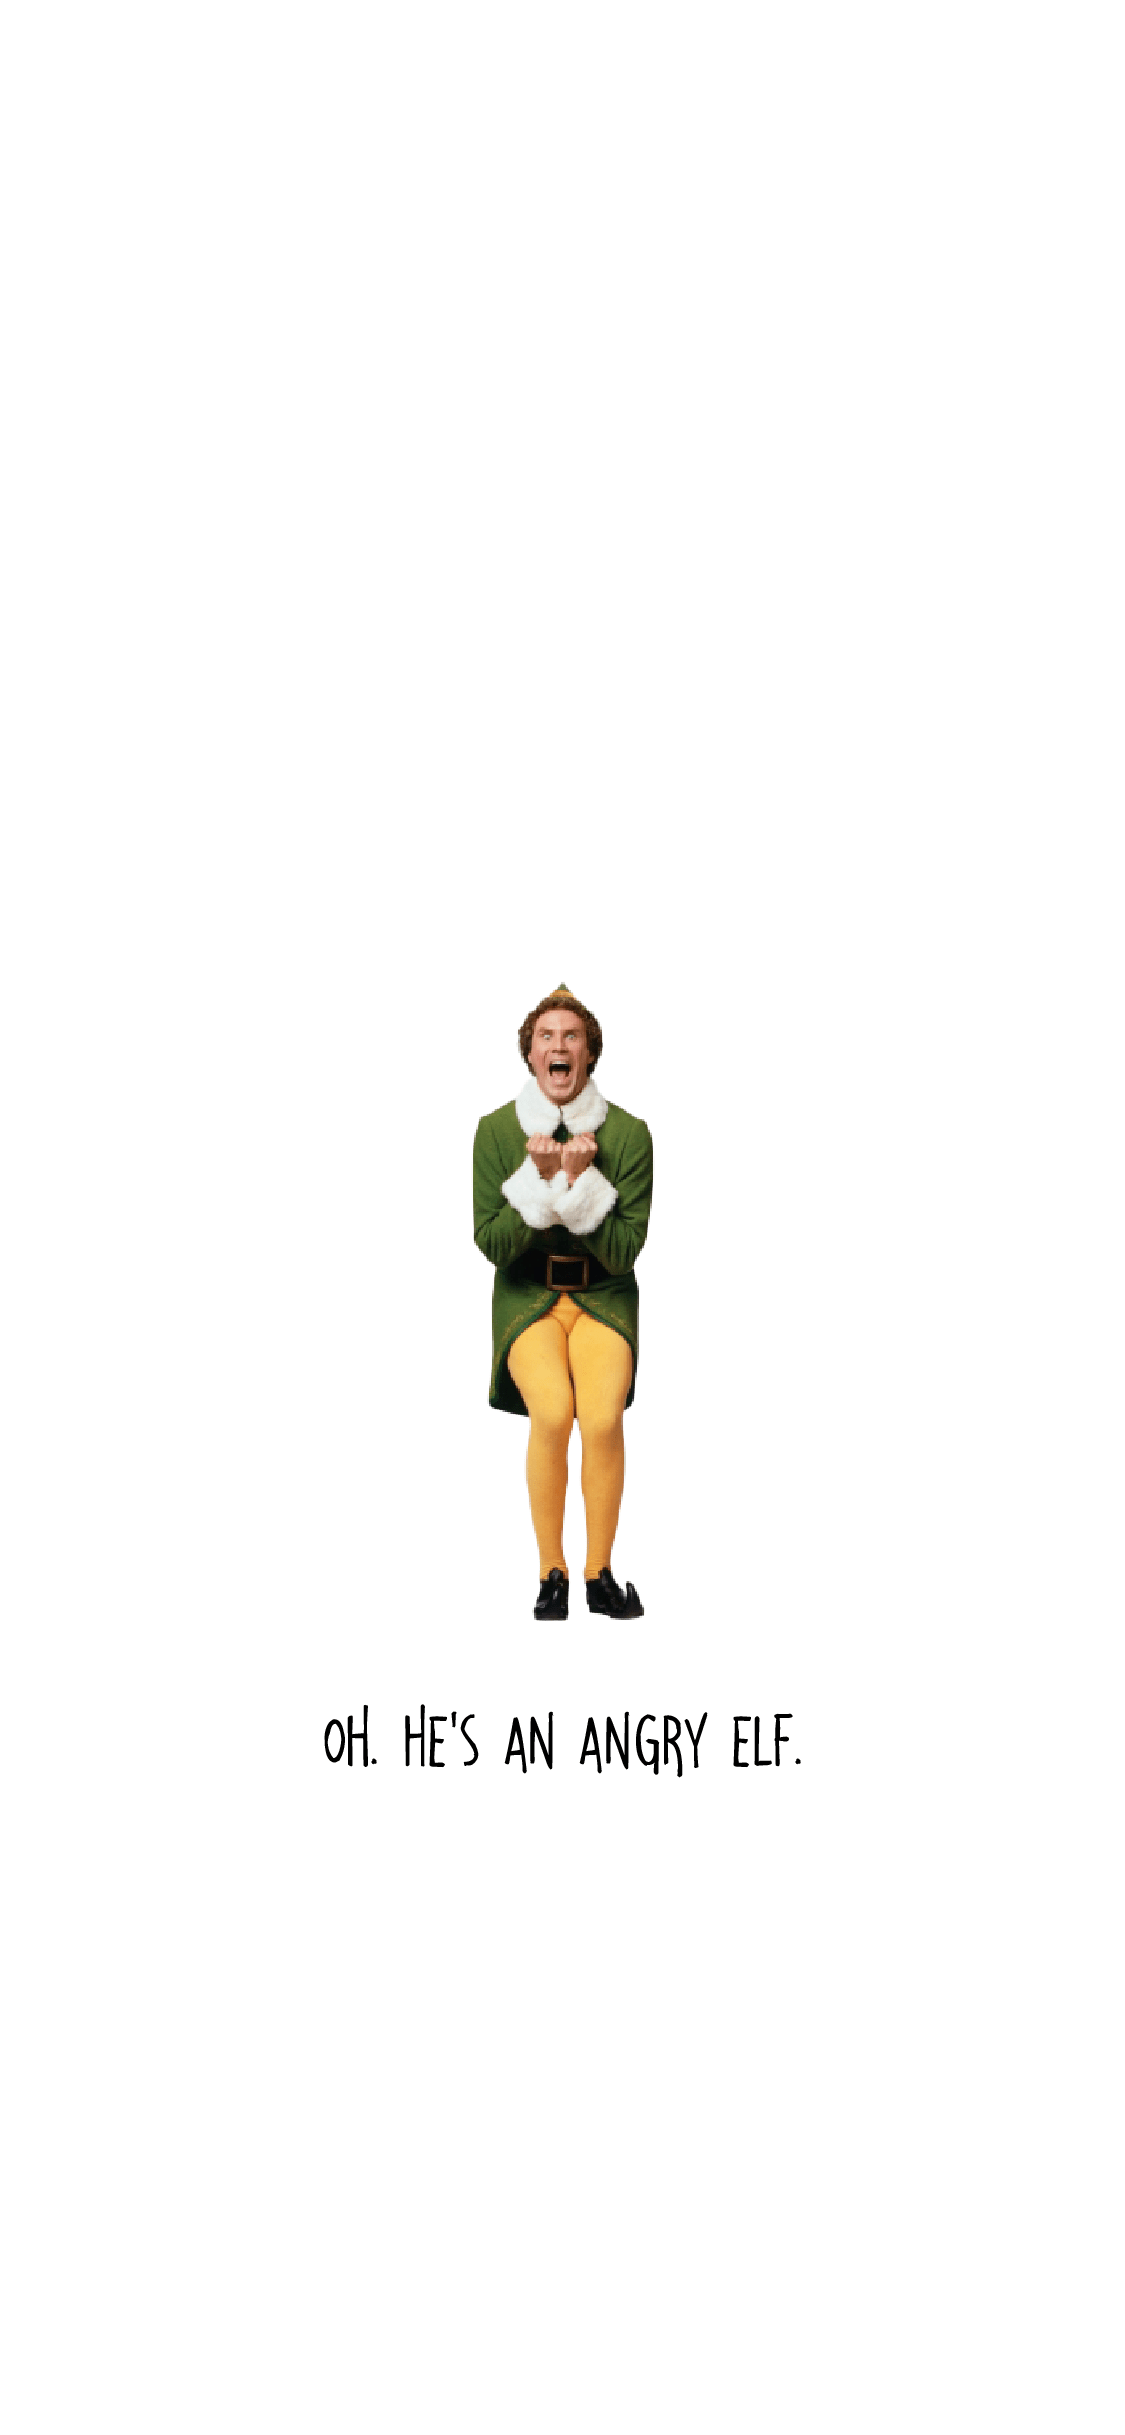 Angry Elf iPhone Wallpaper in 2022 Wallpaper iphone christmas